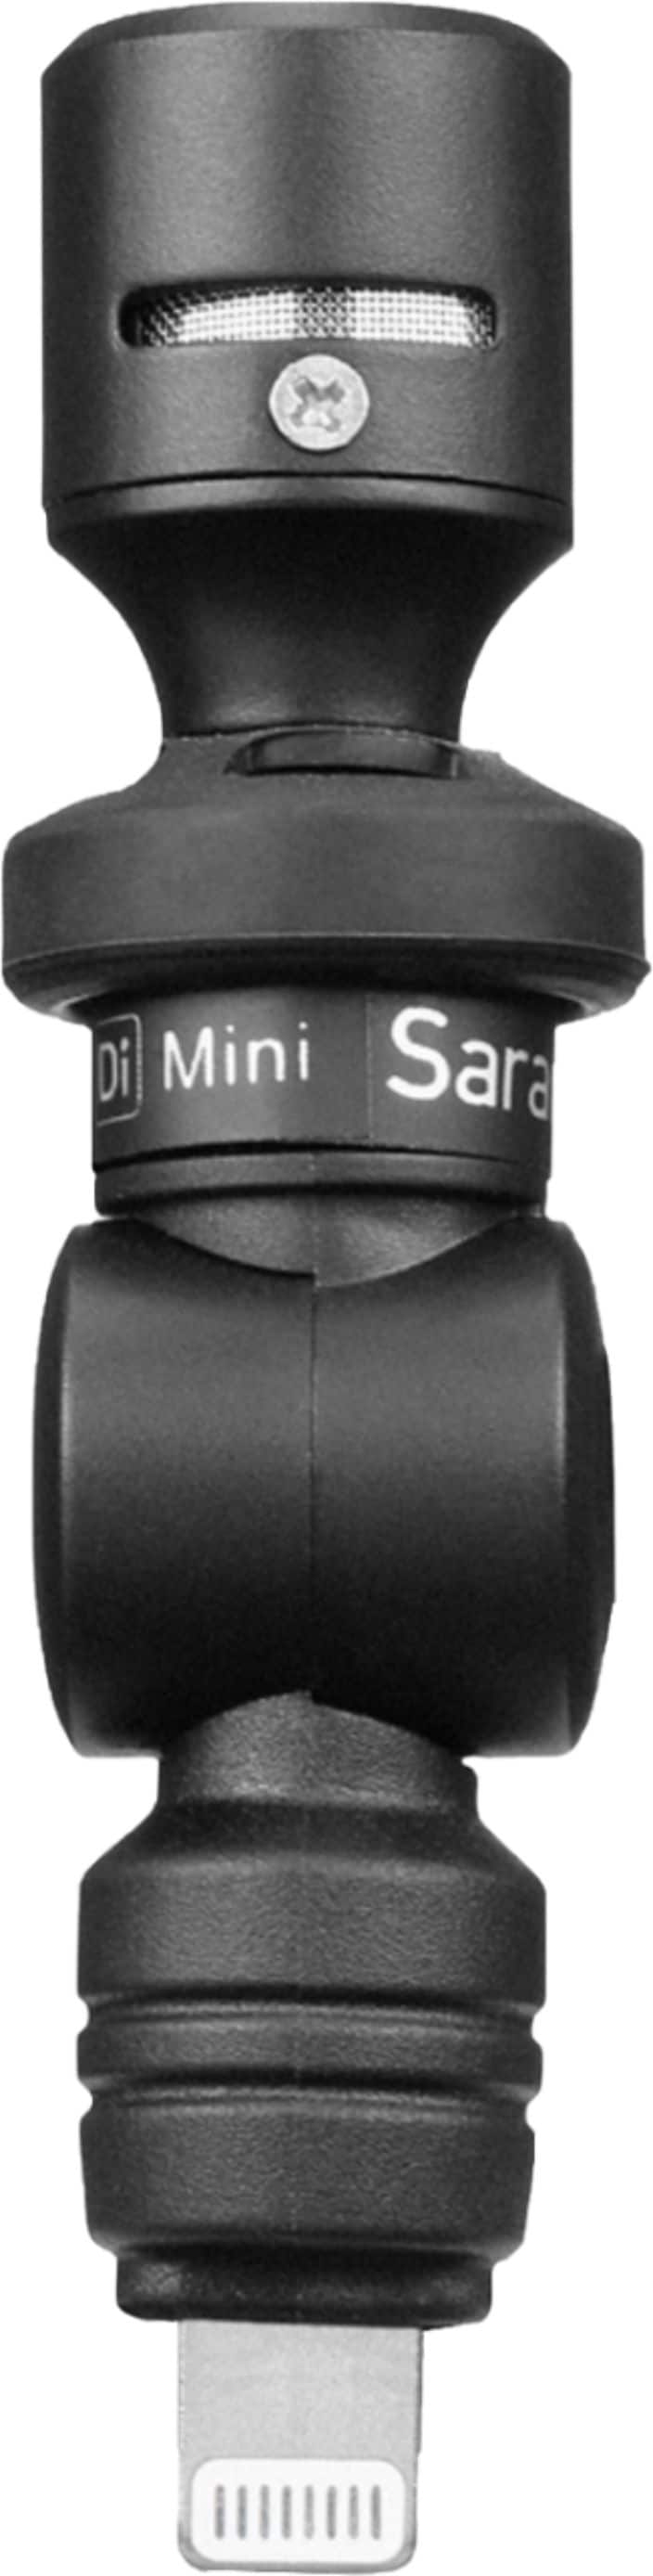 Saramonic - SmartMic DI Mini Ultra-Compact Condenser Microphone with Lightning for Apple iPhones & iPads_0